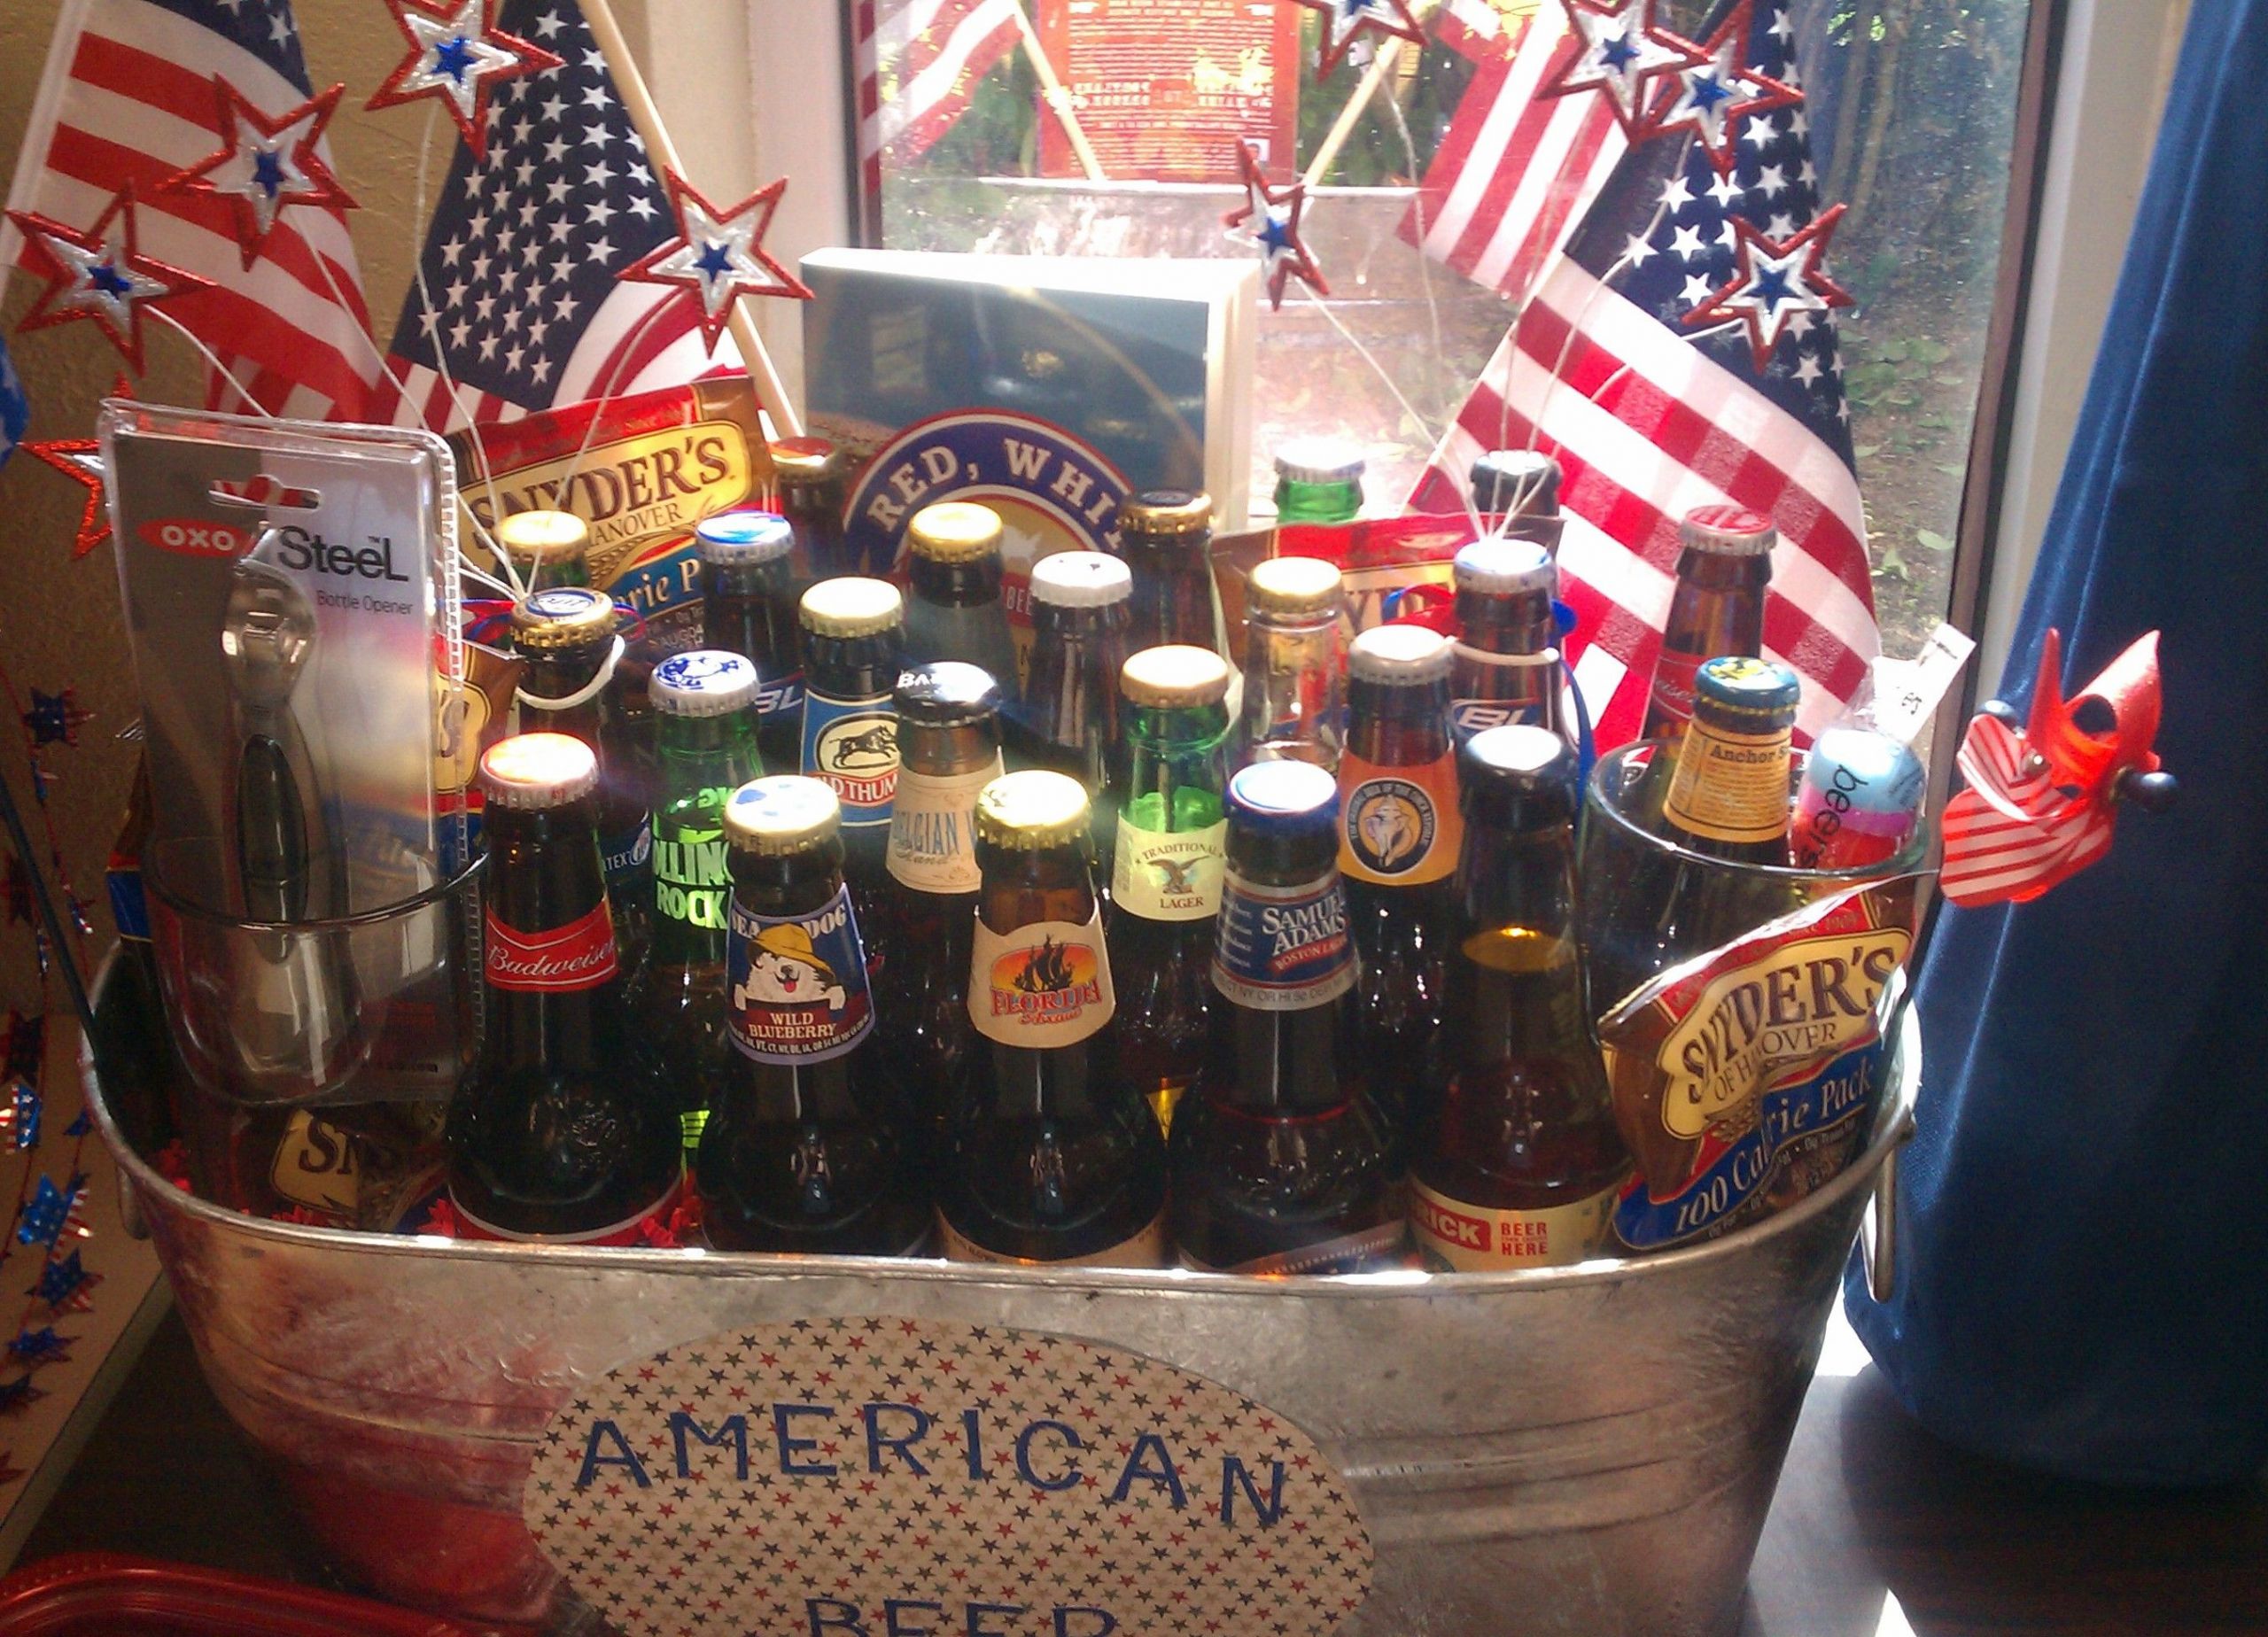 Beer Gift Baskets Ideas
 American Beer Basket I did for our Patriotic themed